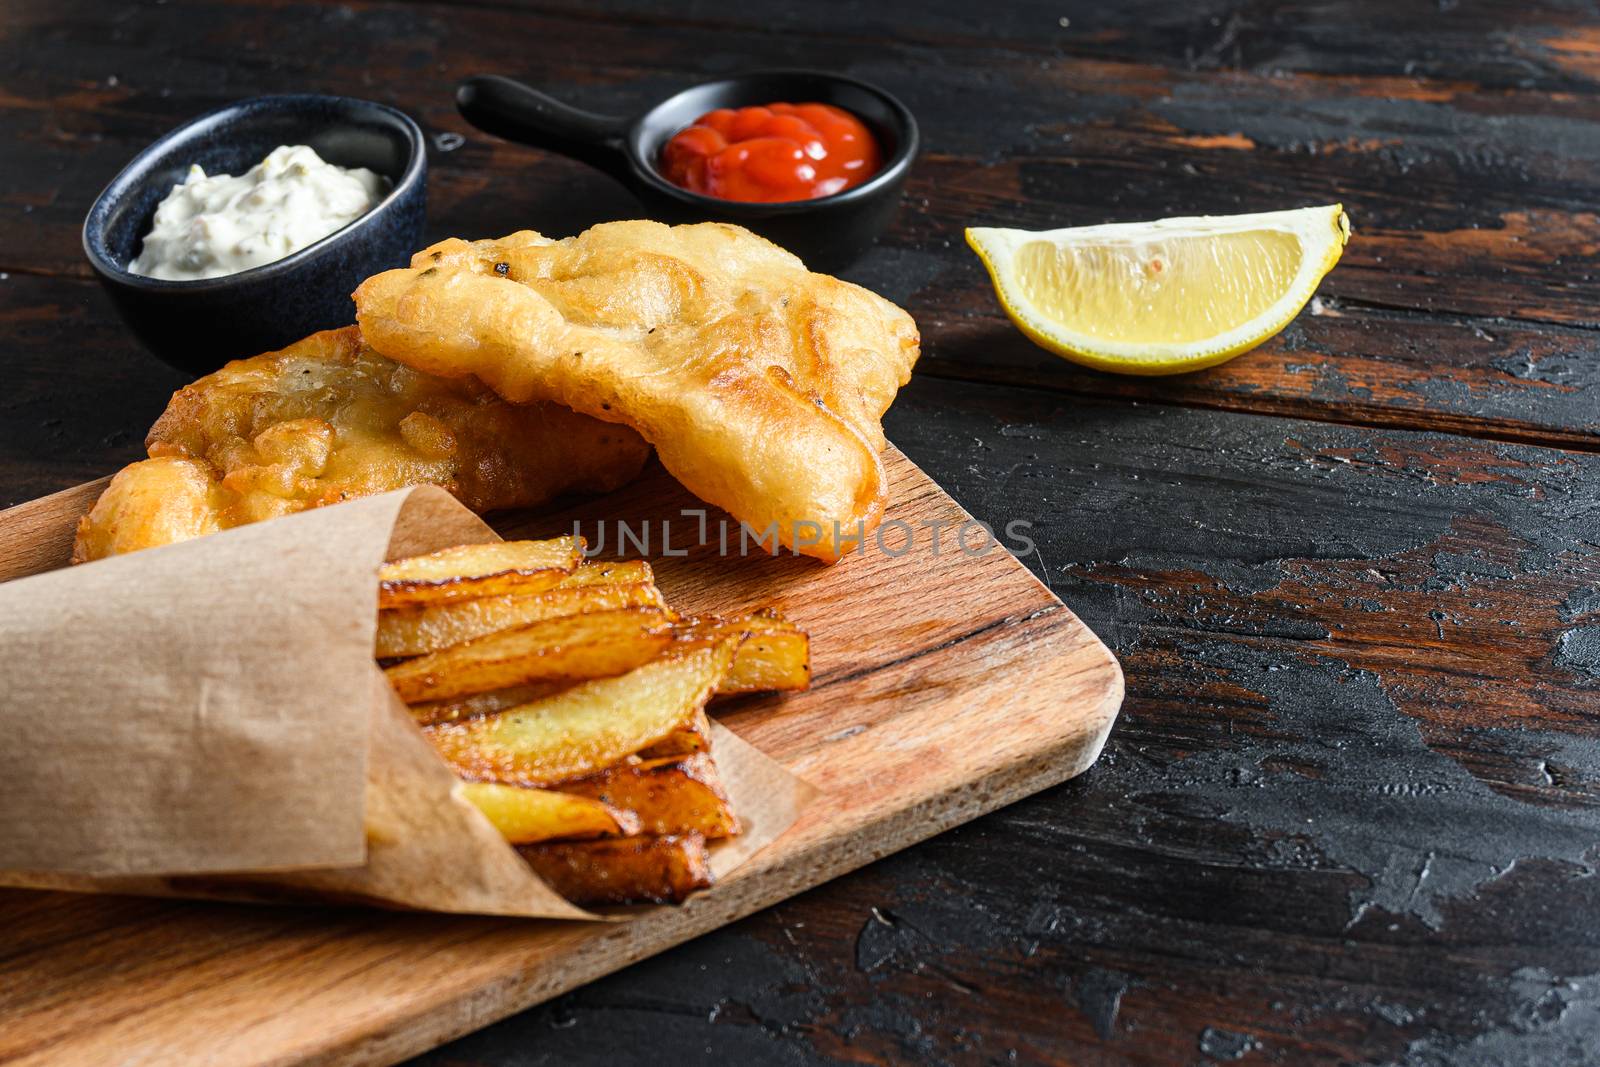 Fish and chips in a paper cone on wood chopping board dip and lemon - fried cod, french fries, lemon slices, tartar sauce, ketchup tomatoe and with mushy peas served in the Pub or Restaurant over old wooden planks dark table side view close up space for text by Ilianesolenyi